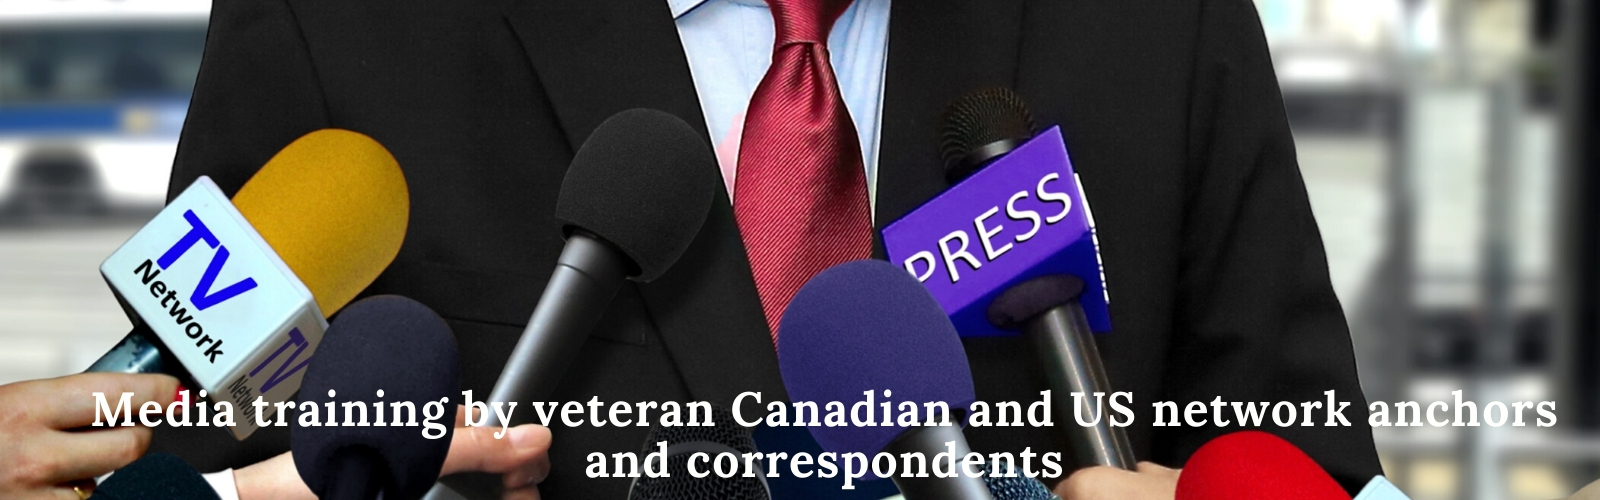 Media training by veteran Canadian and US network anchors and correspondents